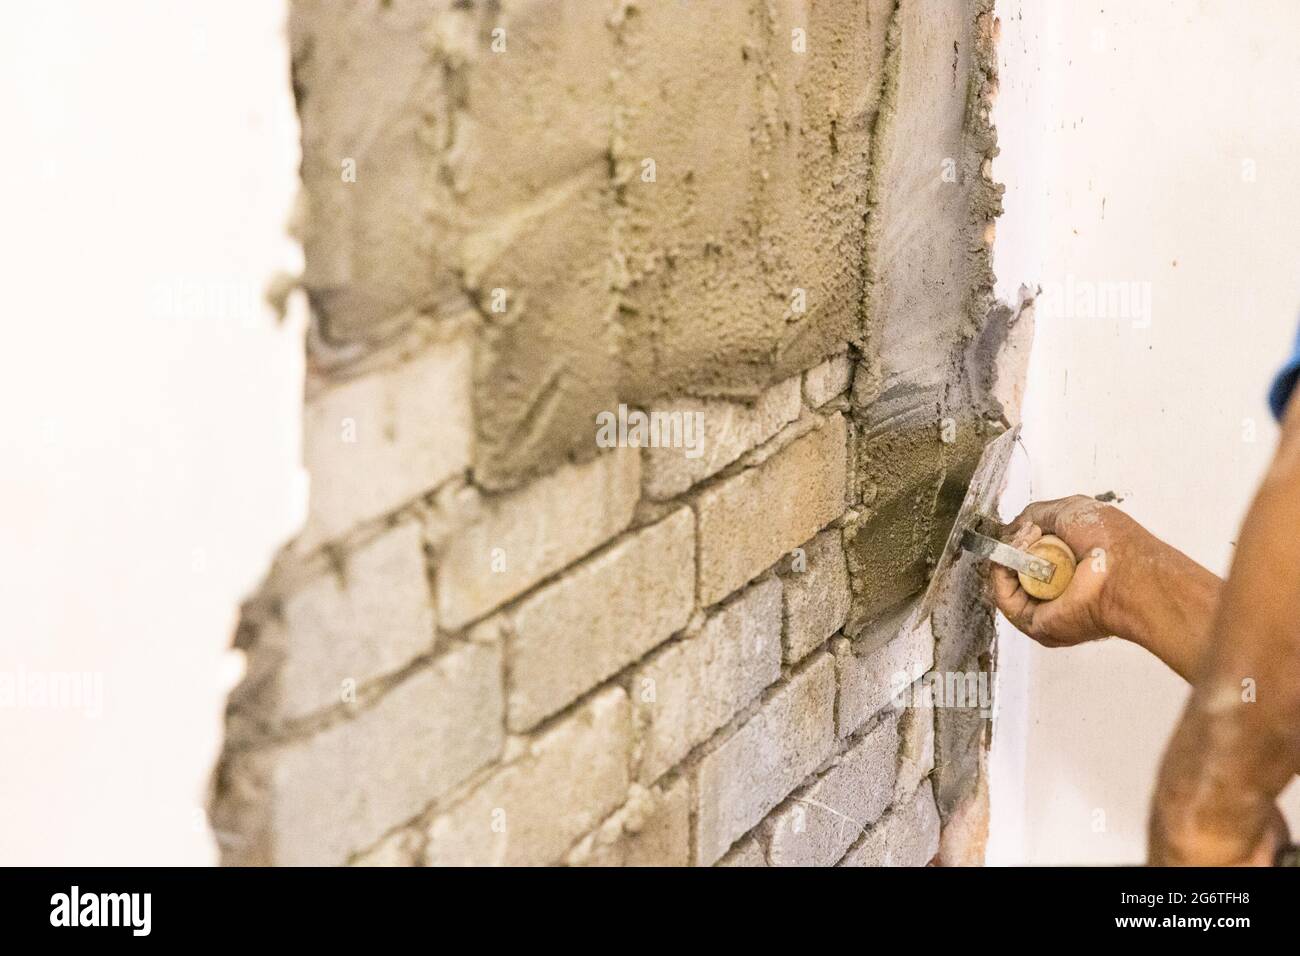 Worker plastering cement mortar on brick wall with trowel Stock Photo